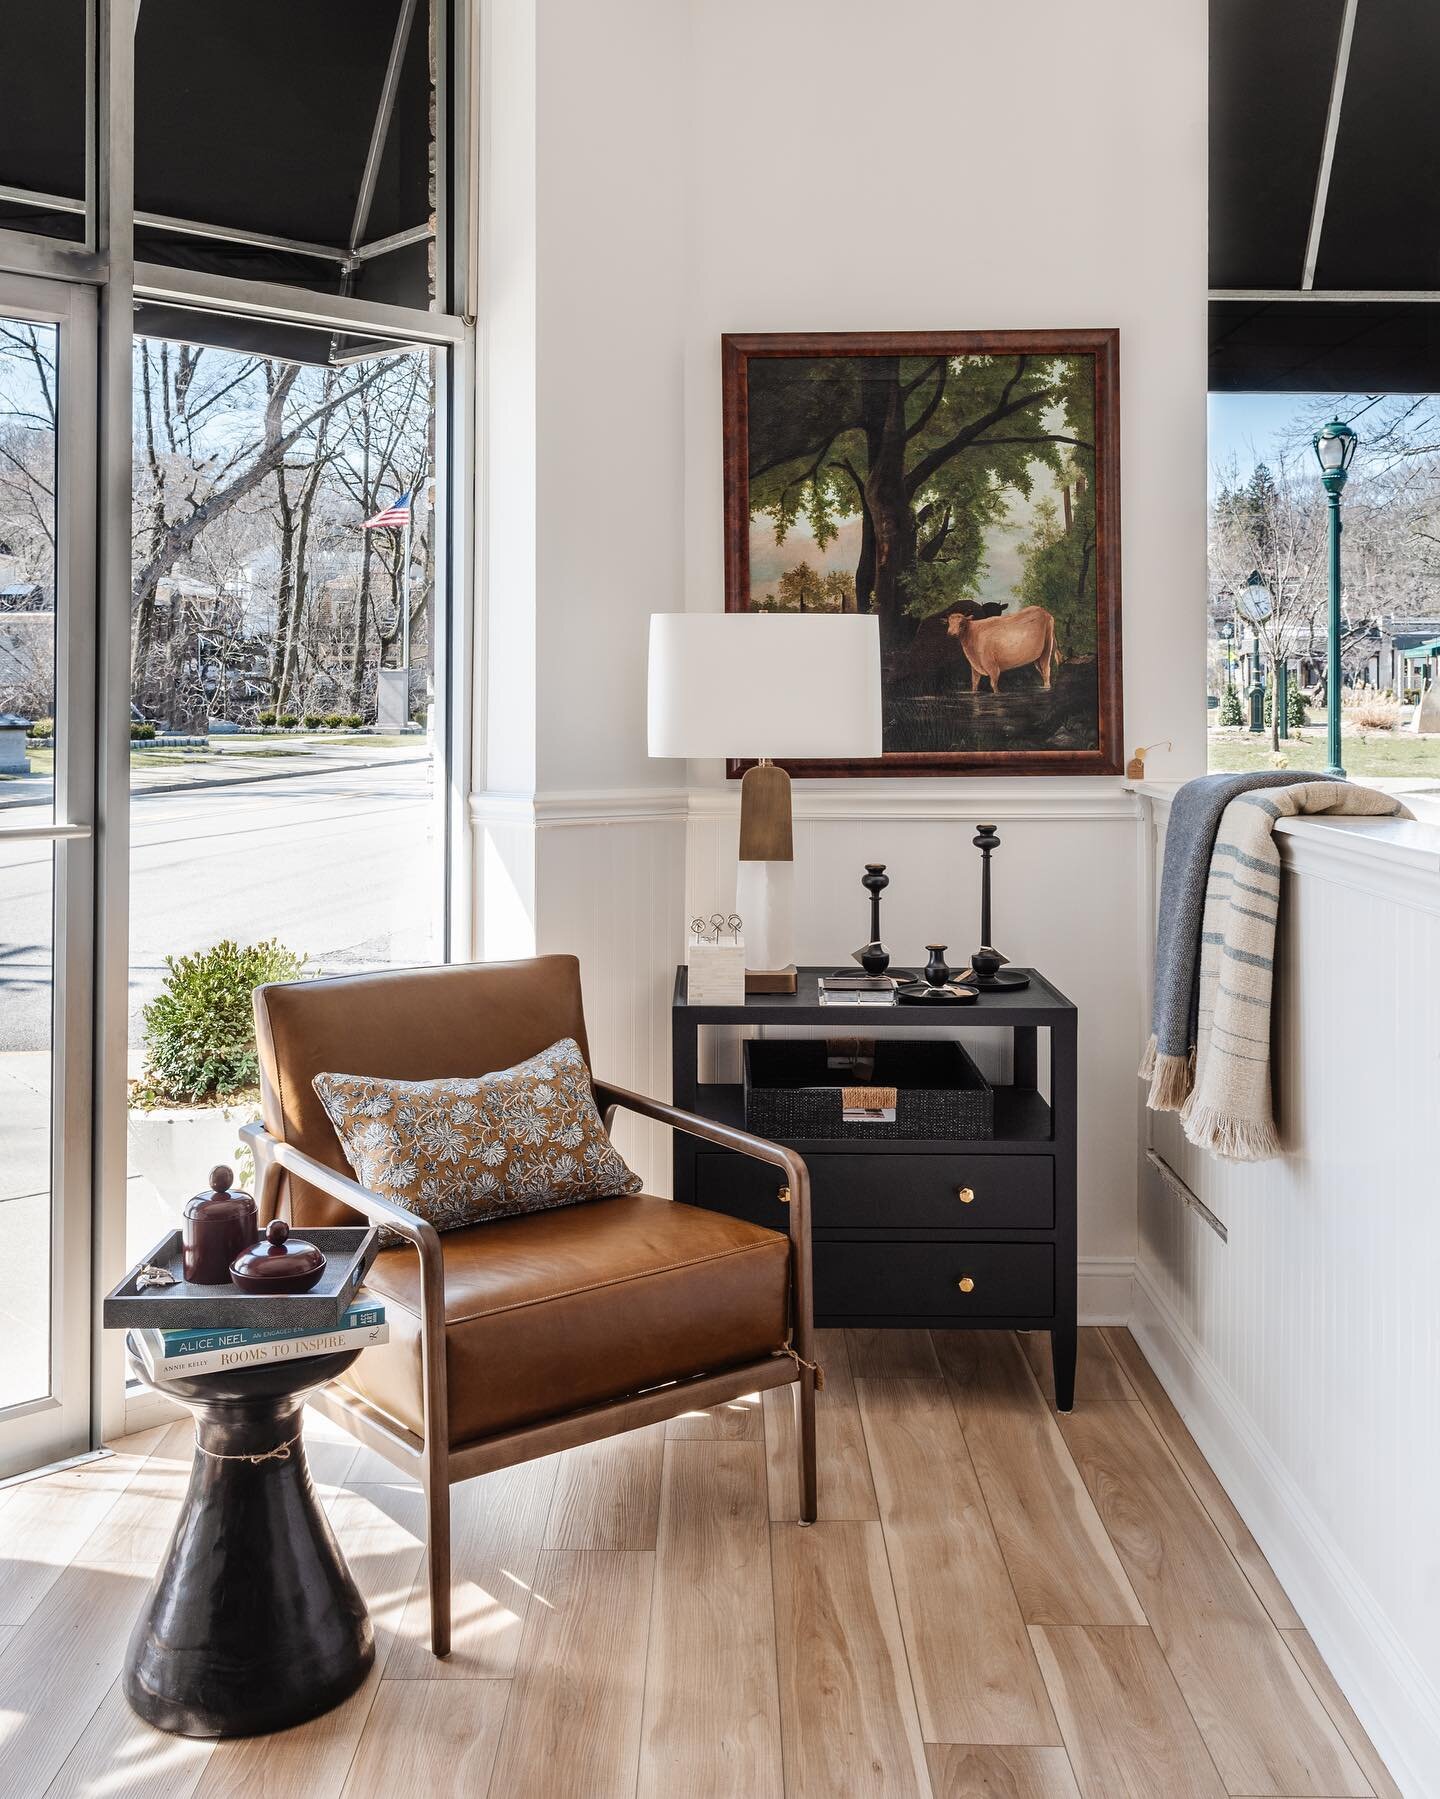 Announcing a fun new partnership!  Proppe Shoppe will now by offering local pick ups at @twosycamore, a home goods store and design boutique in Ho-Ho-Kus, NJ.  Alexis Hughes, the owner and principal designer behind Alexis Hughes &amp; Co., @alexishug